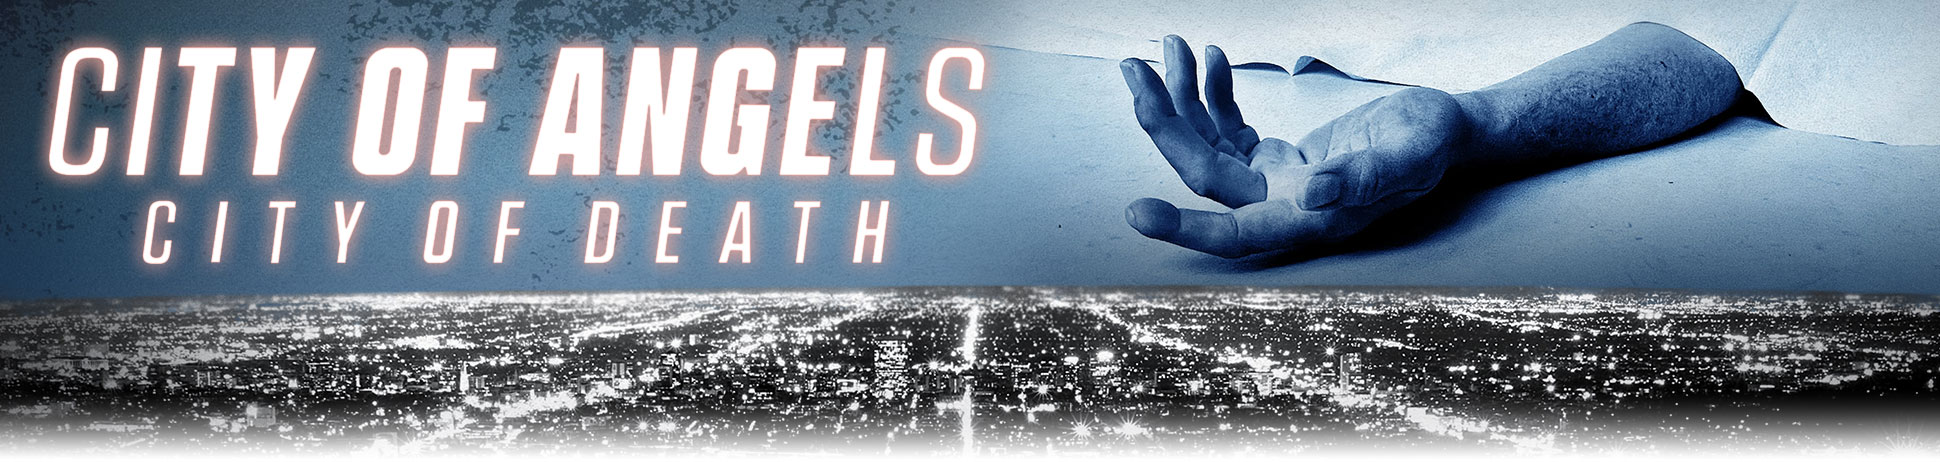 City of Angels | City of Death